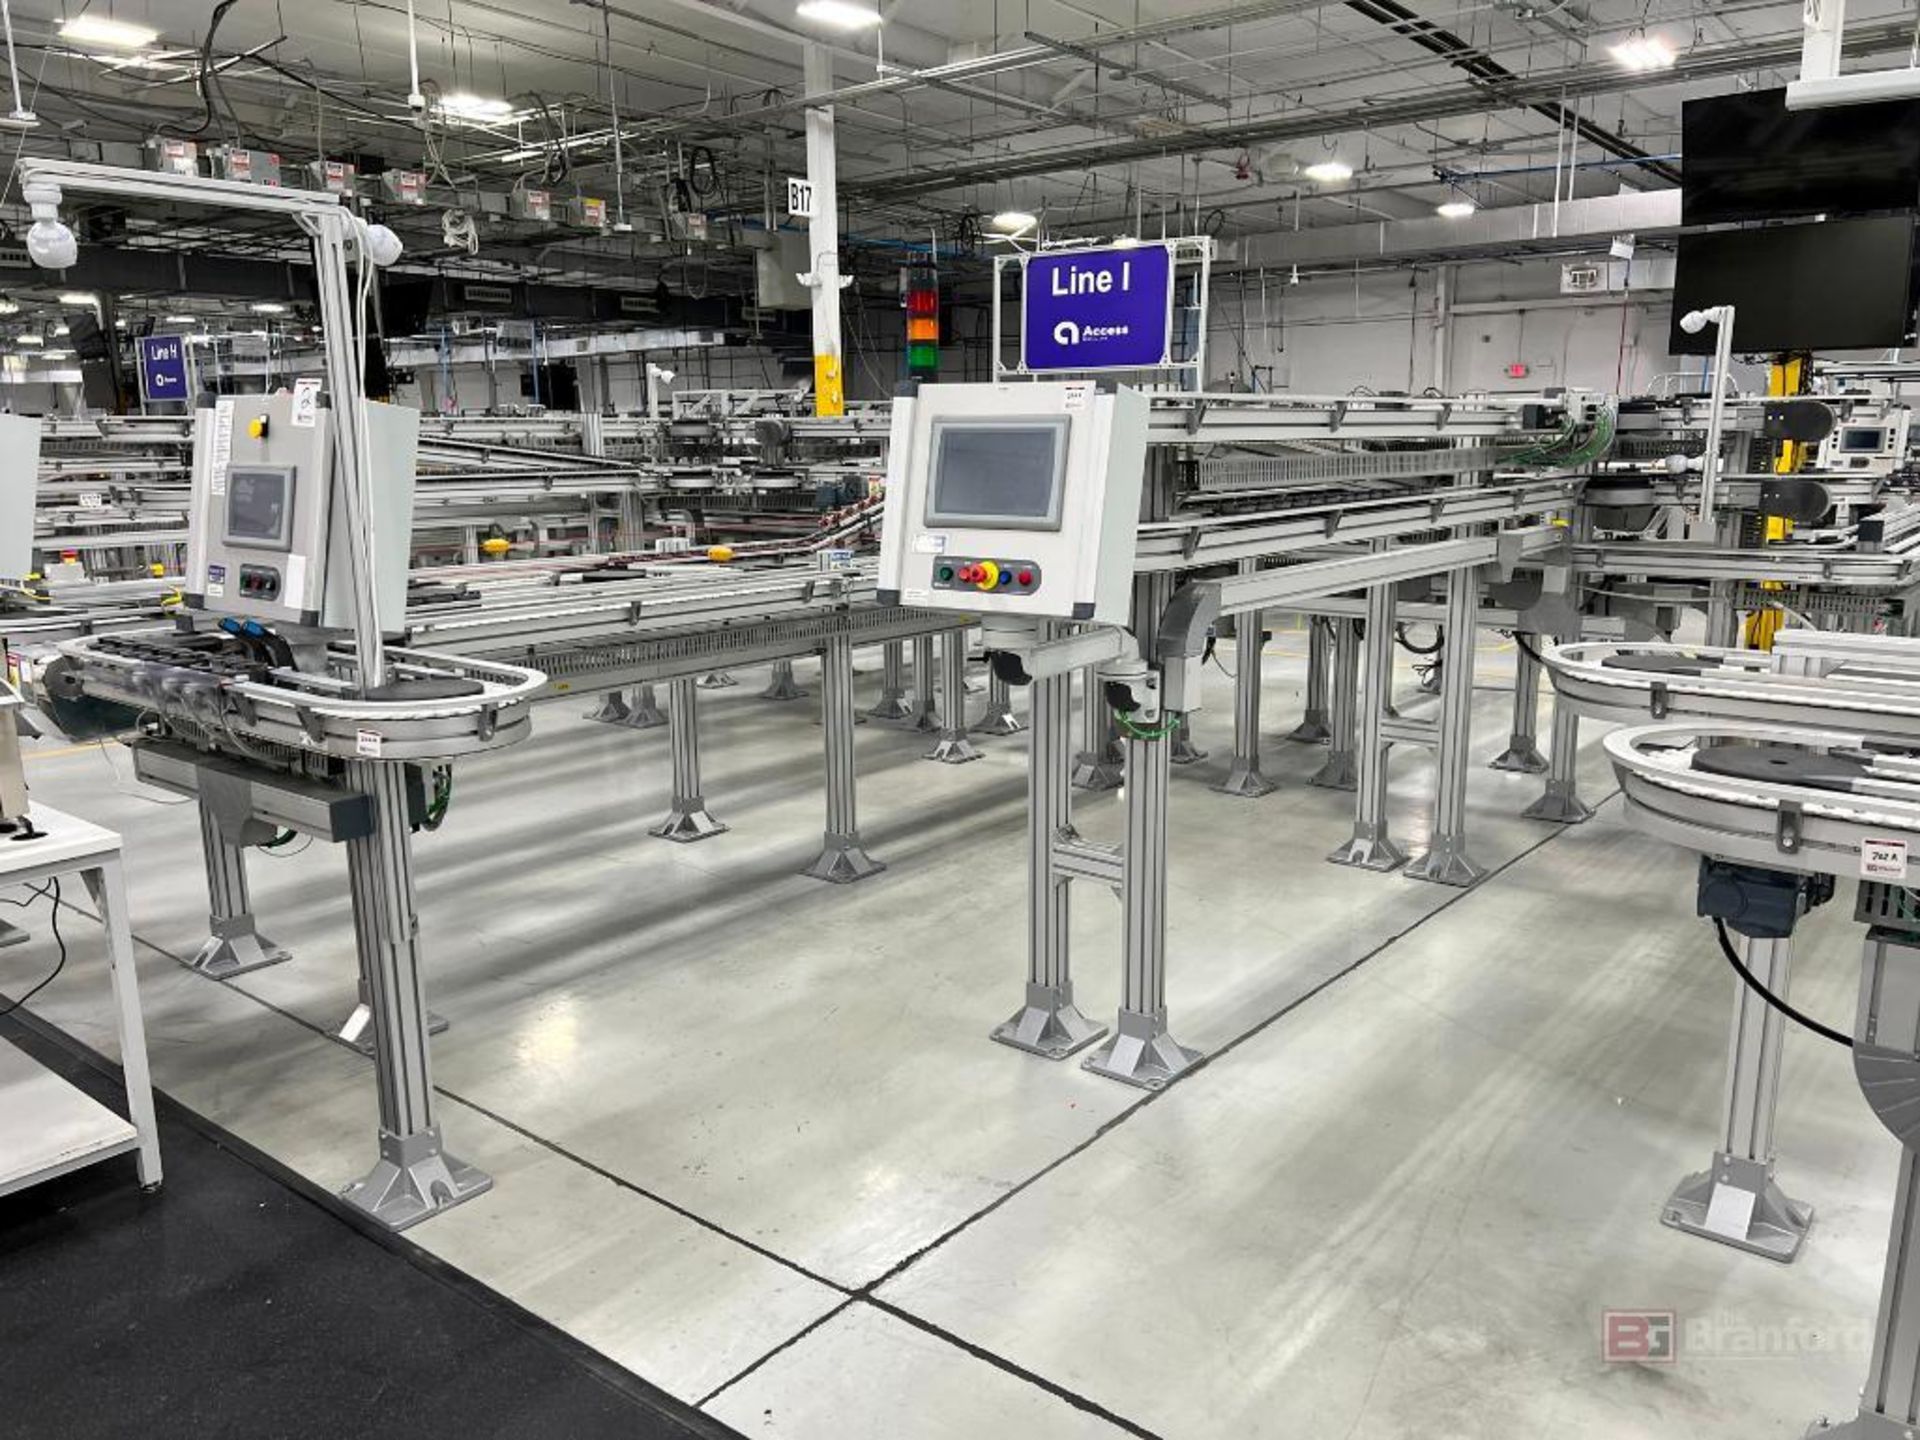 Flexlink Gen2 Multi-Layer Belt Conveyor System with DRO main control - Image 18 of 18